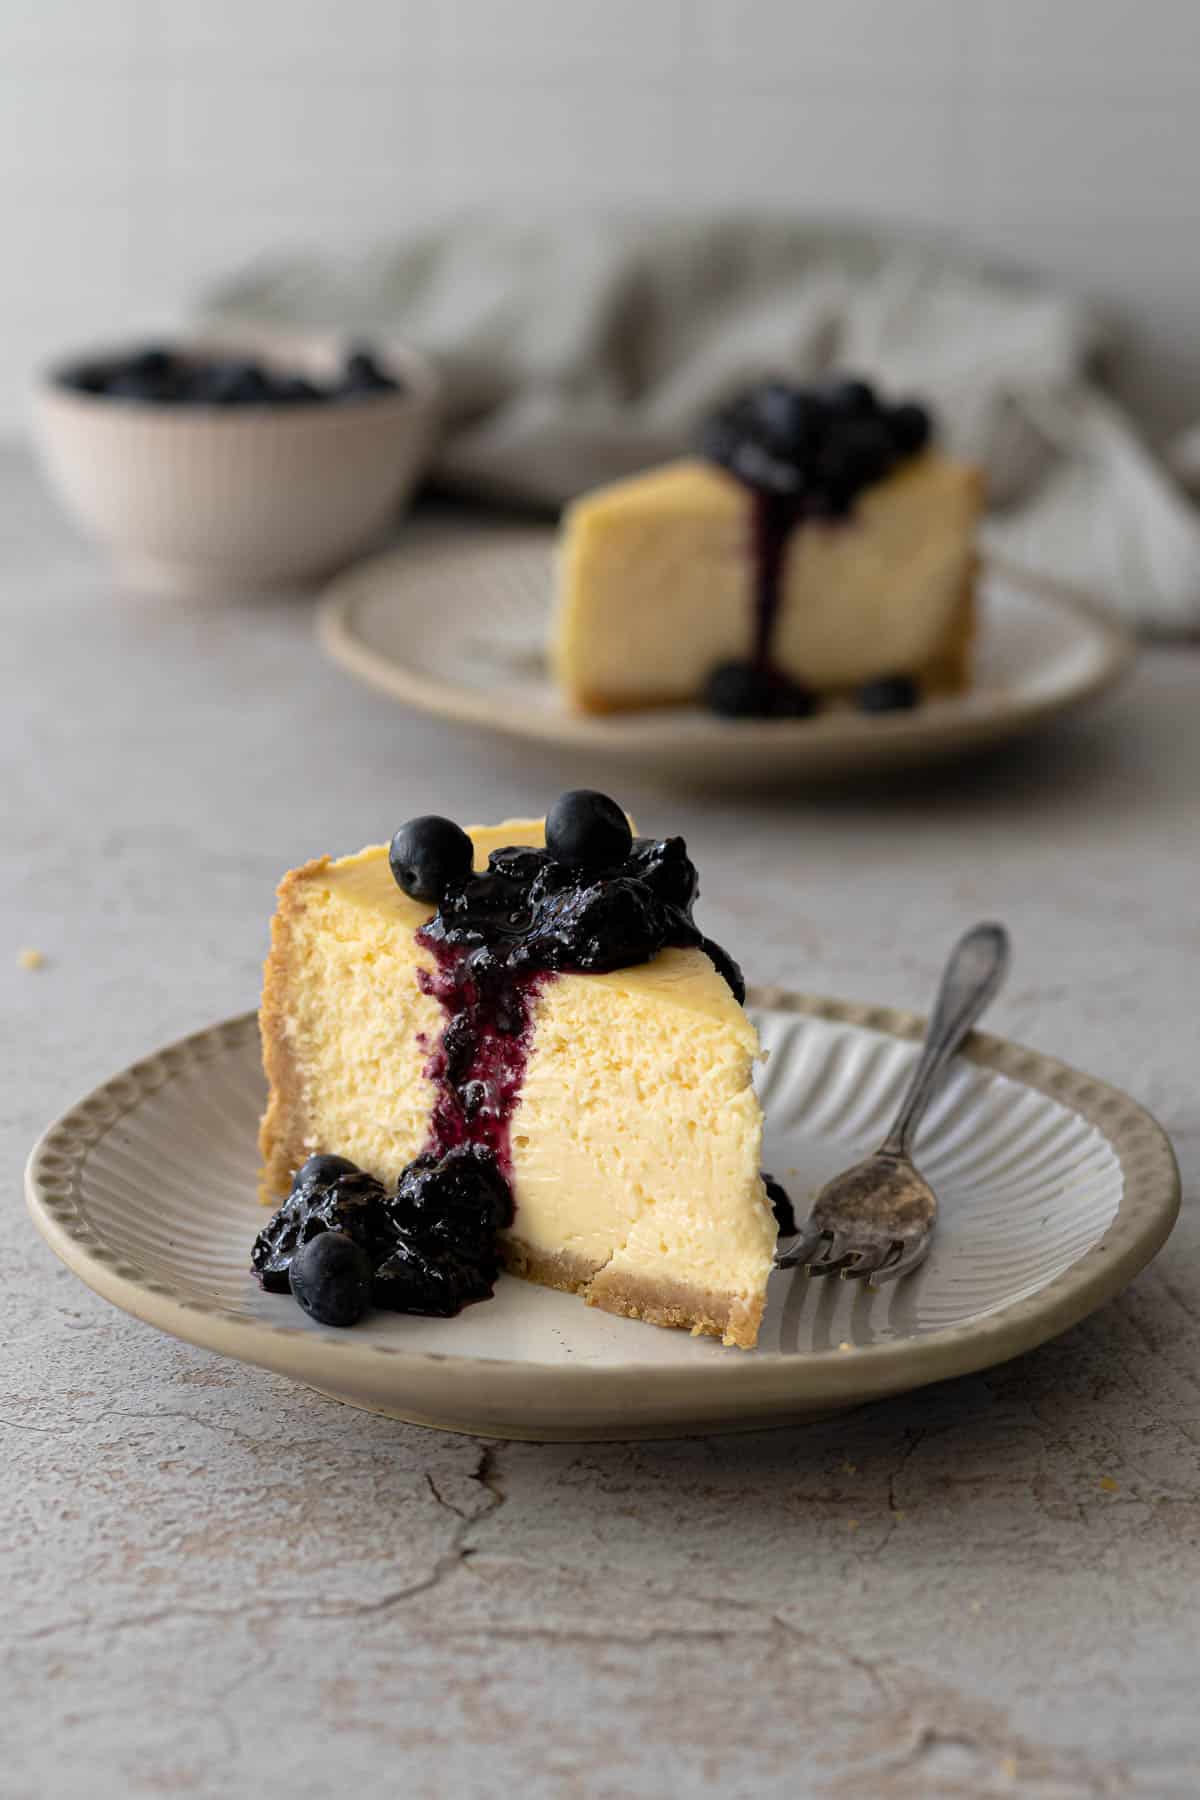 Slice of New York cheesecake with a blueberry sauce.